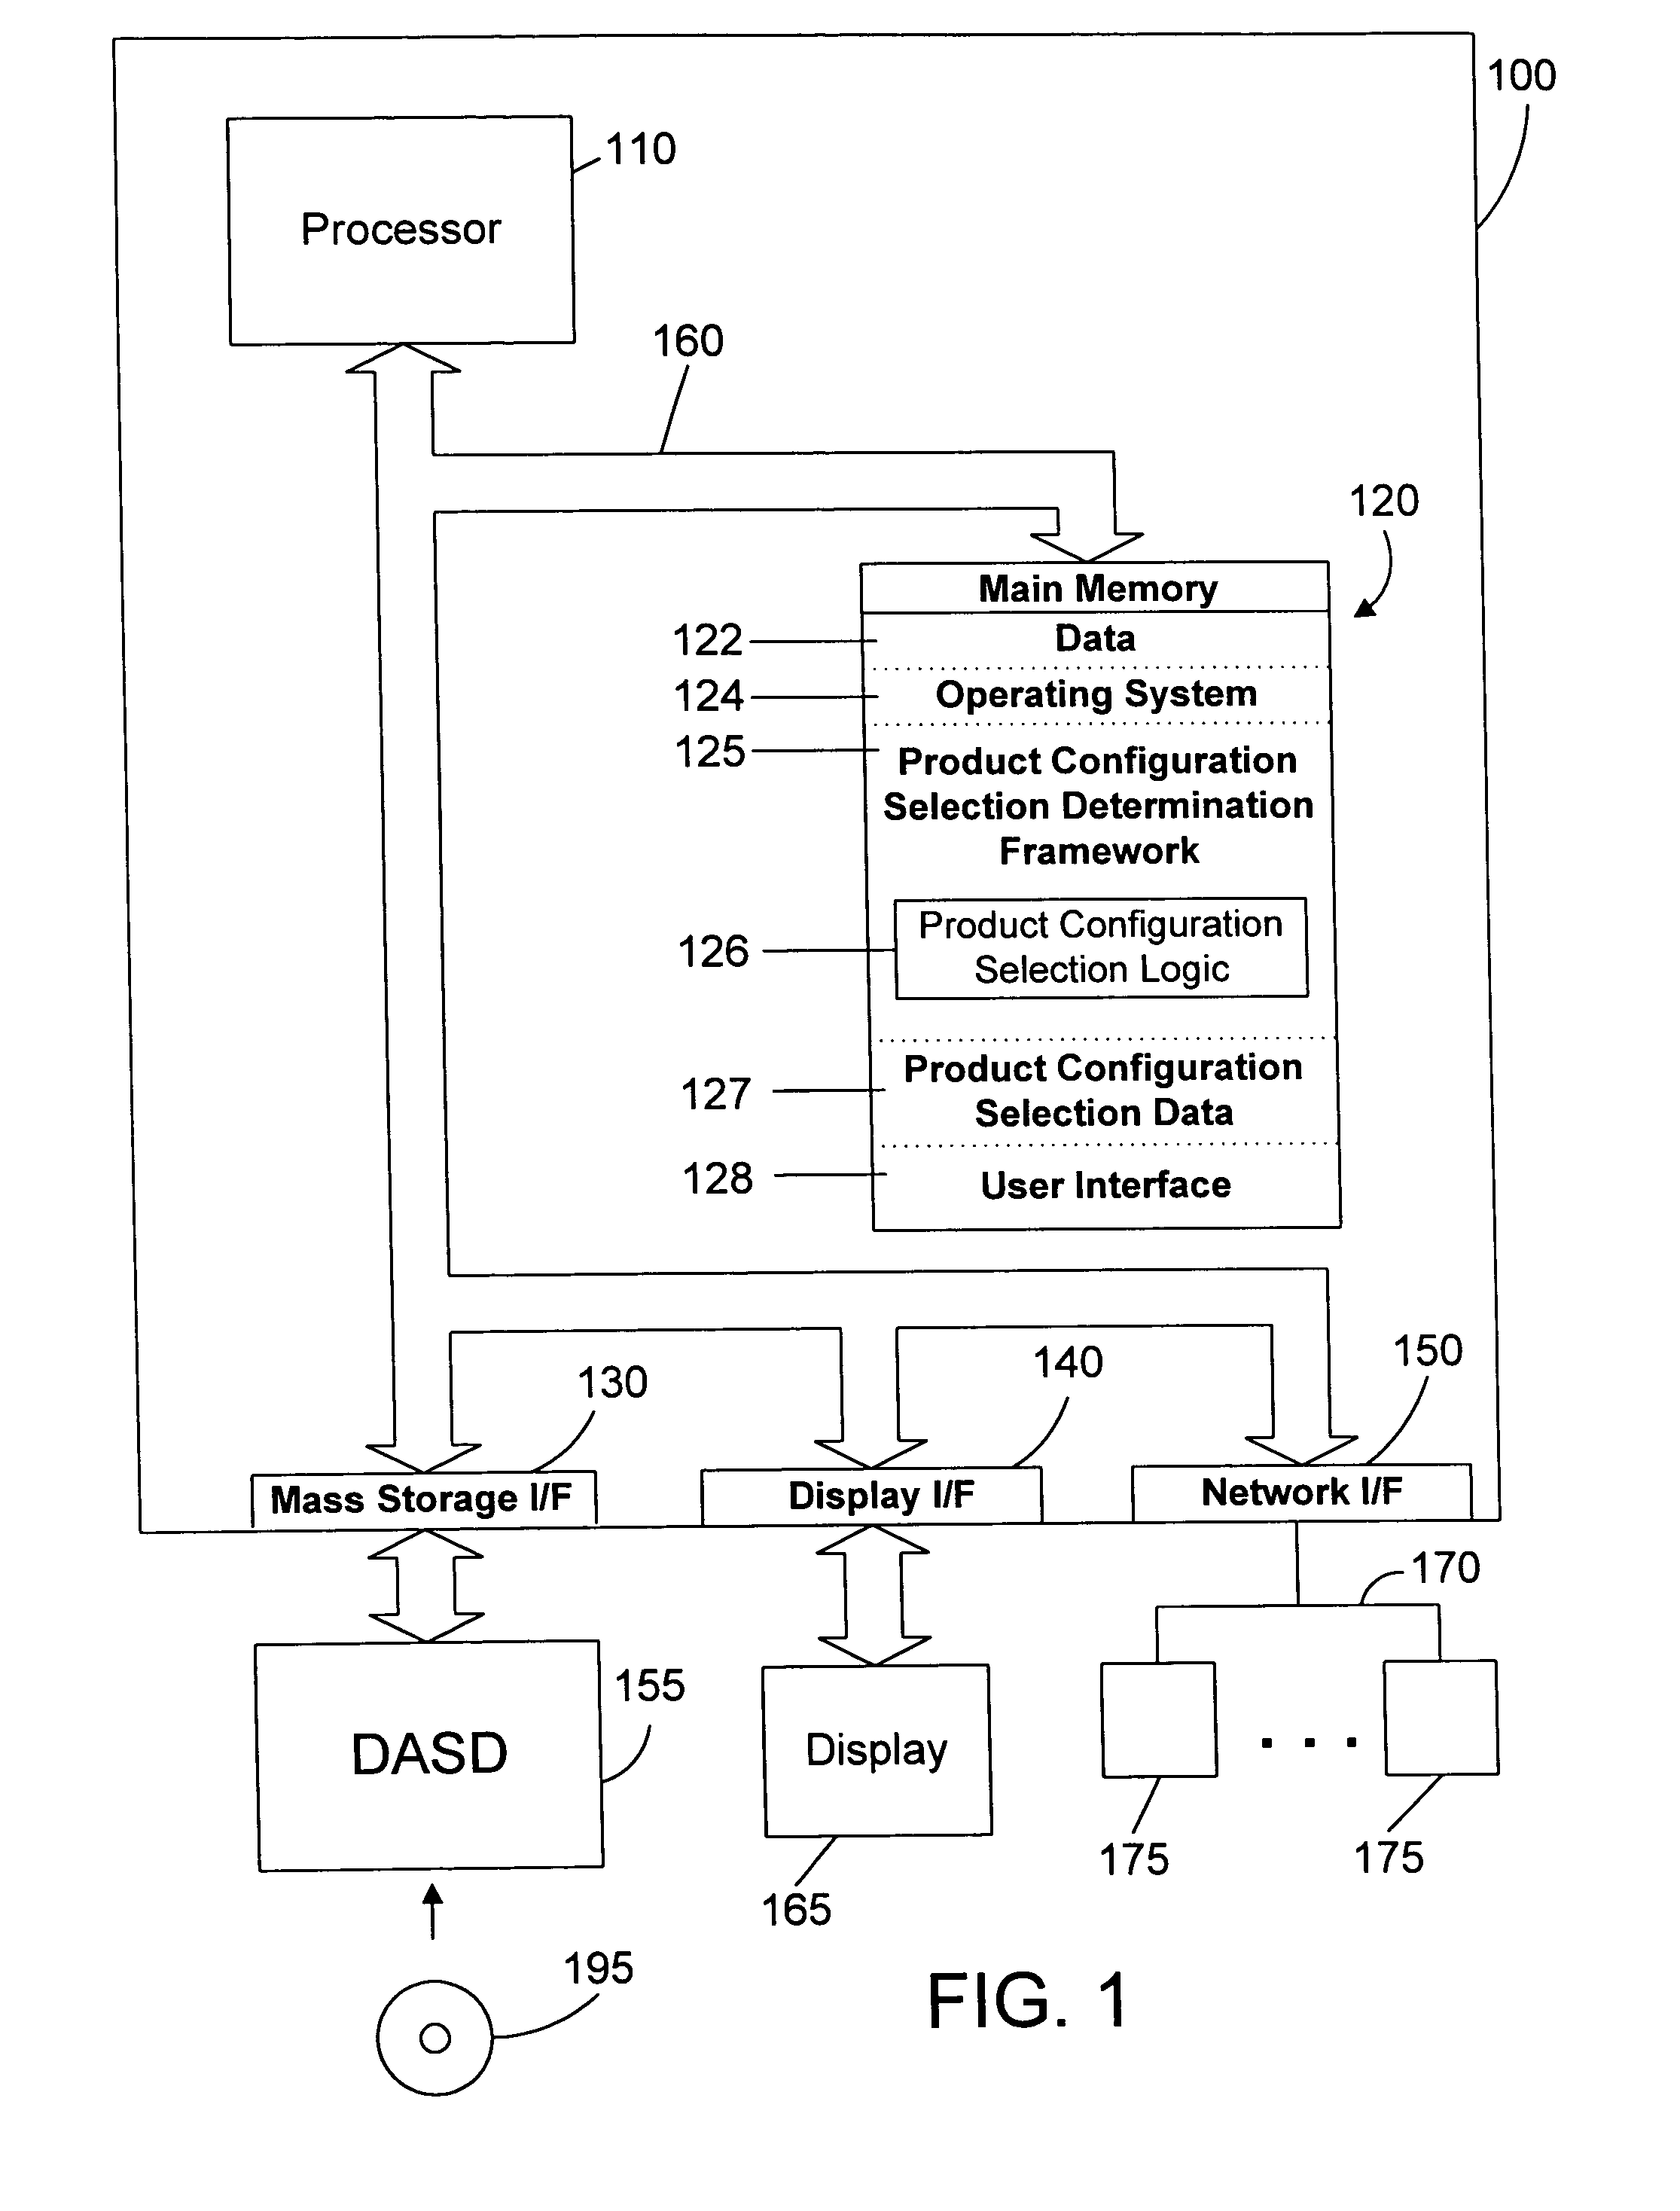 Object oriented framework mechanism and method for product configuration selection determination